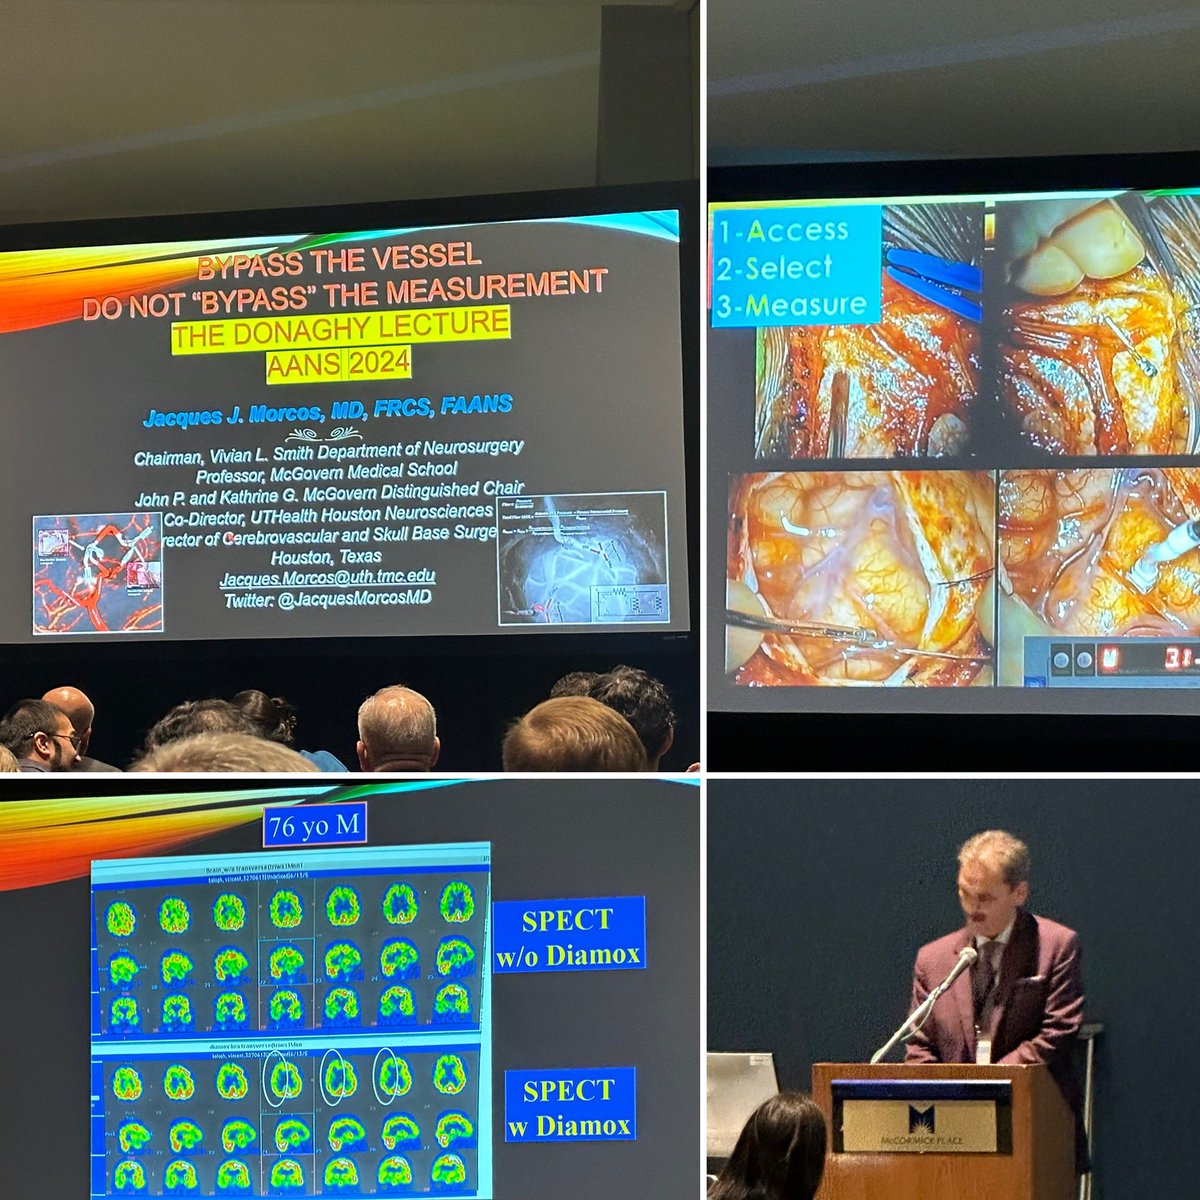 A wonderful Raymond M. Donaghy lecture on Pushing the Envelope in Cerebrovascular Lesions by Dr. Jacques Morcos! #AANS2024 @jacquesmorcosmd @UTHealthHouston @UTHealthNeuro @IsaacYangMD @UCLANsgy @AANSNeuro #WhatMatters2Me